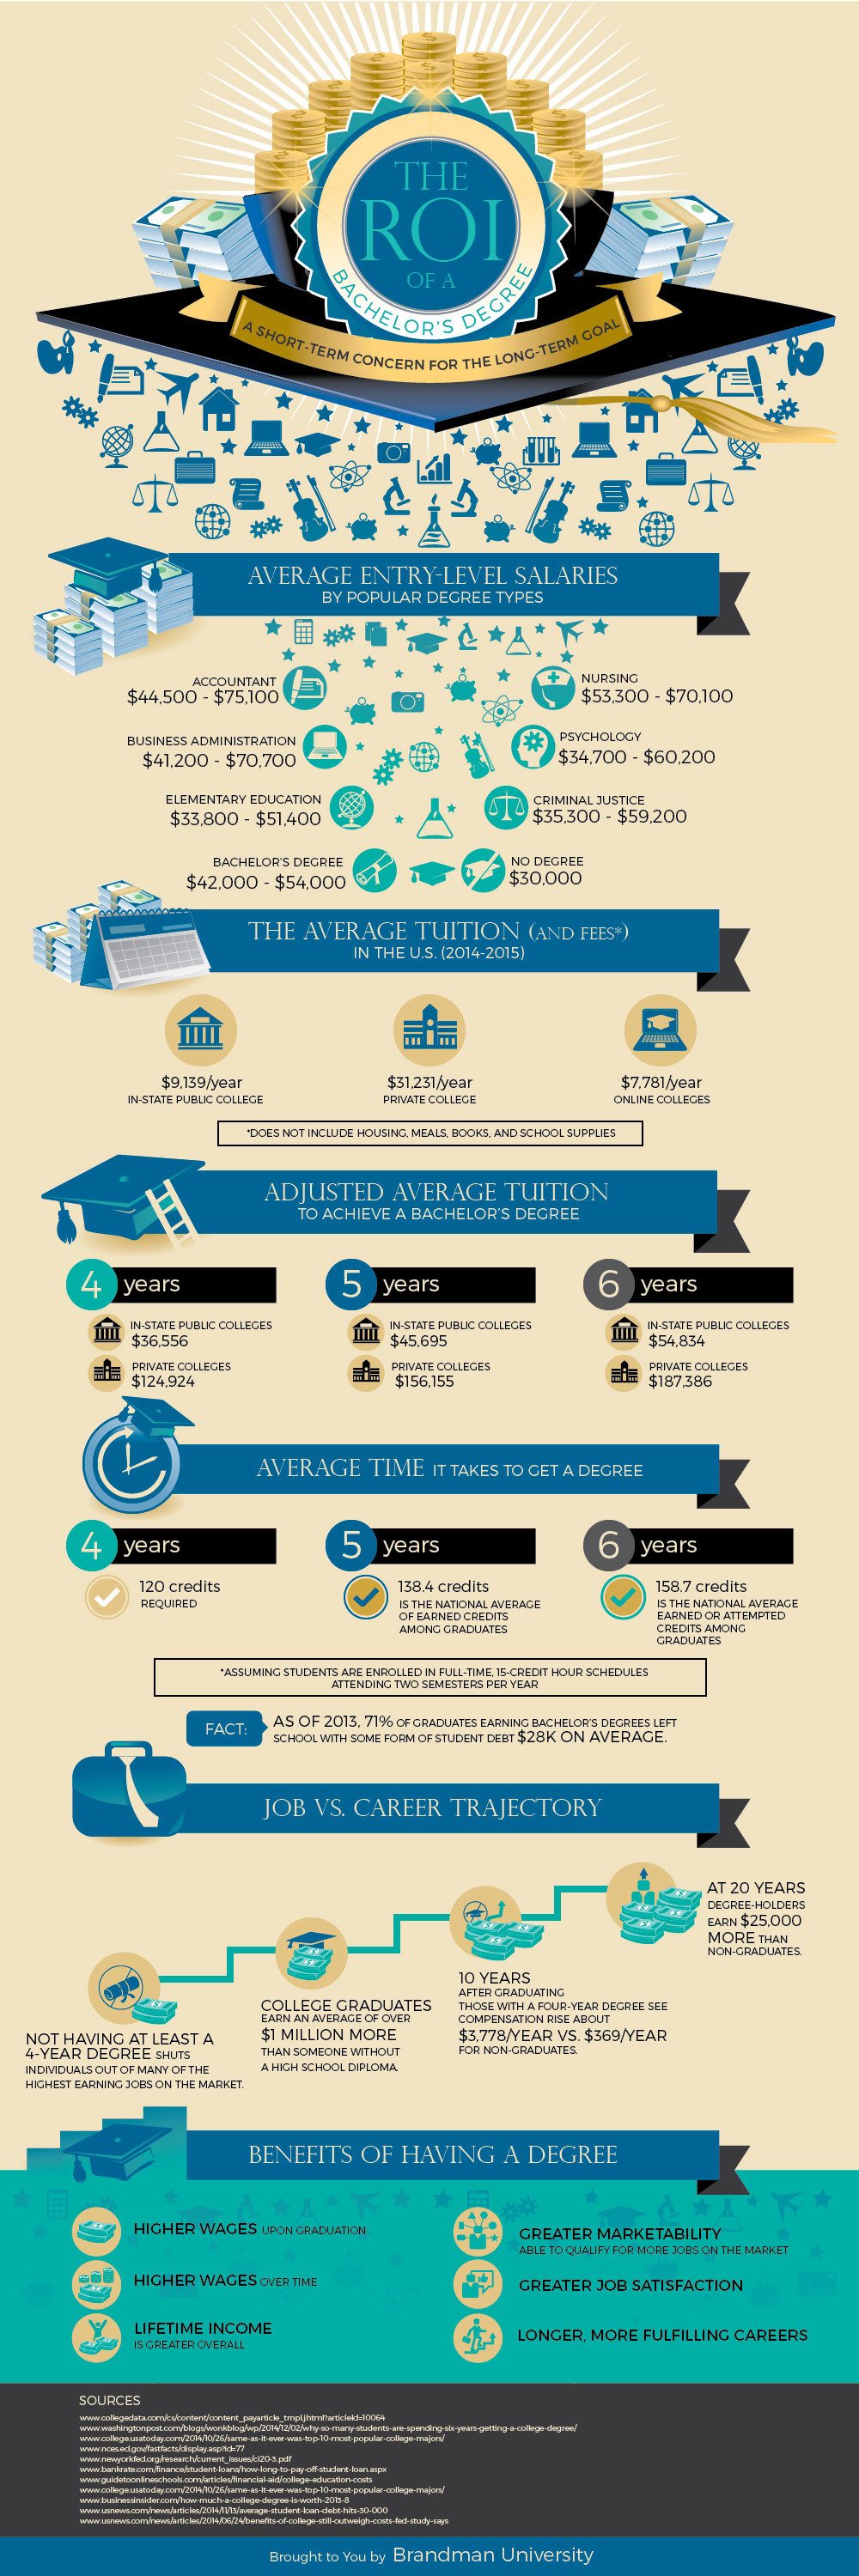 The ROI of a Bachelor's Degree Infographic